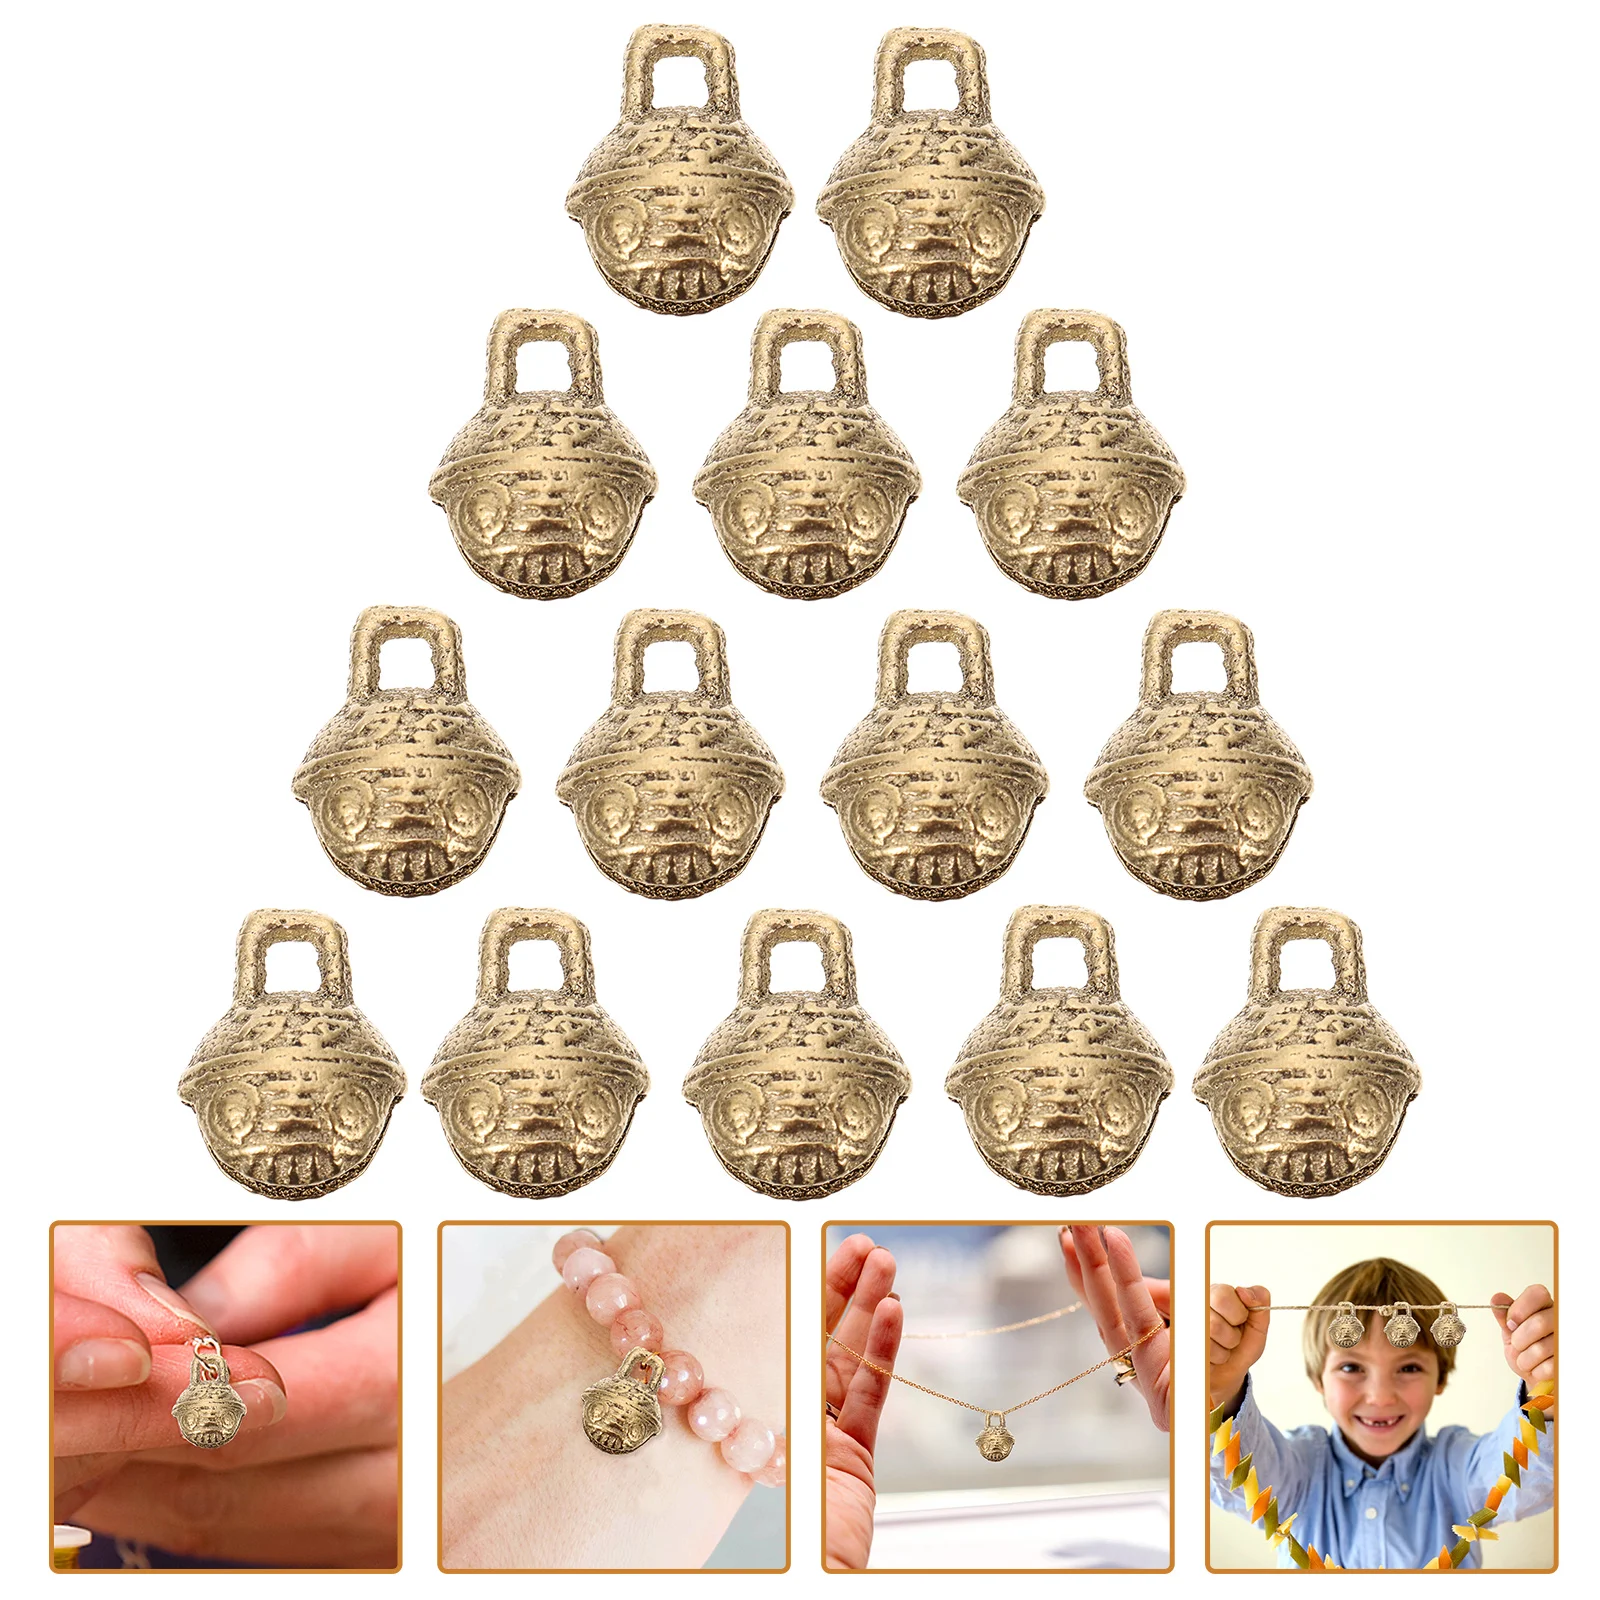 

Bells Bell Charms Making Vintage Copper Craft Jewelry Diy Crafts Jingle Hanging Shui Feng Lucky Decorative Brass Wind Chime Mini